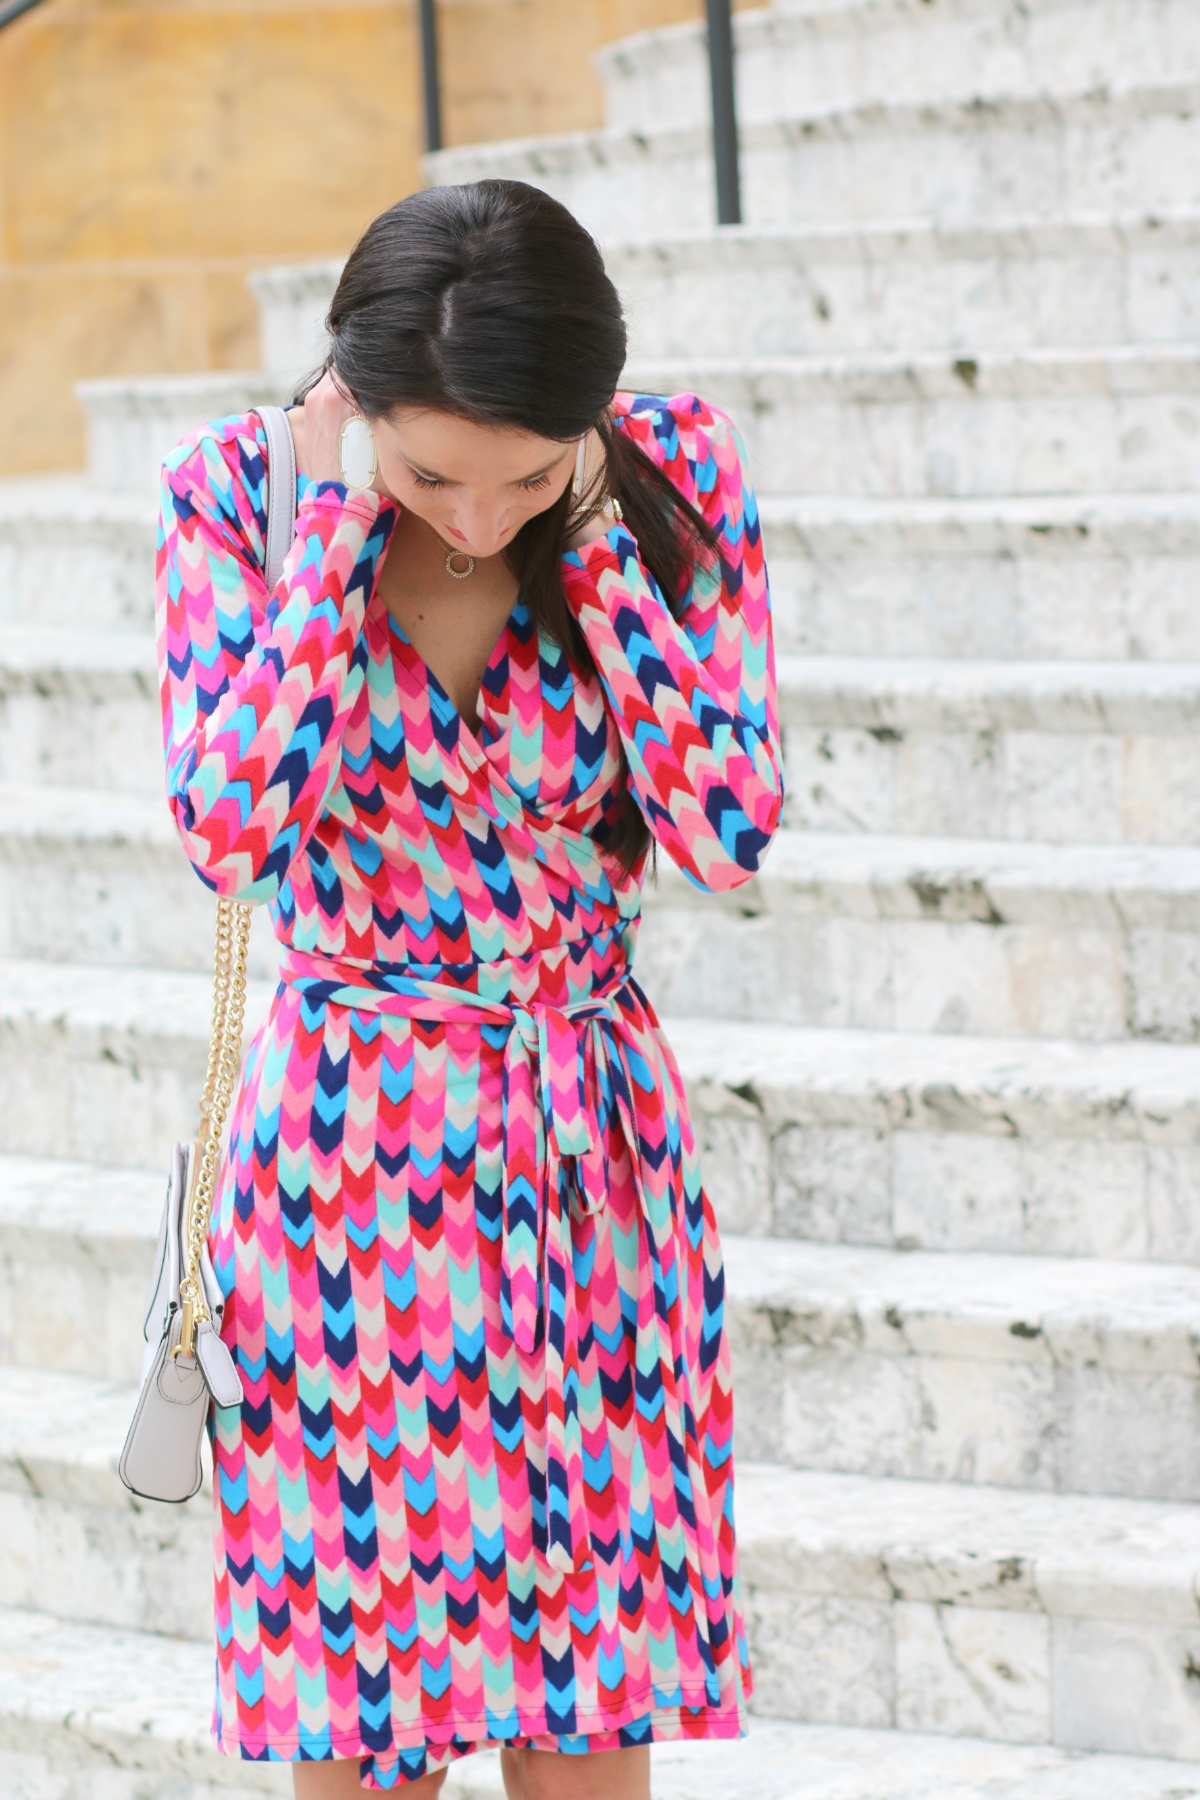 All for Color, Dream Weave, Wrap Dress, Fall Fashion, Giveaway, Stephanie Ziajka, Diary of a Debutante